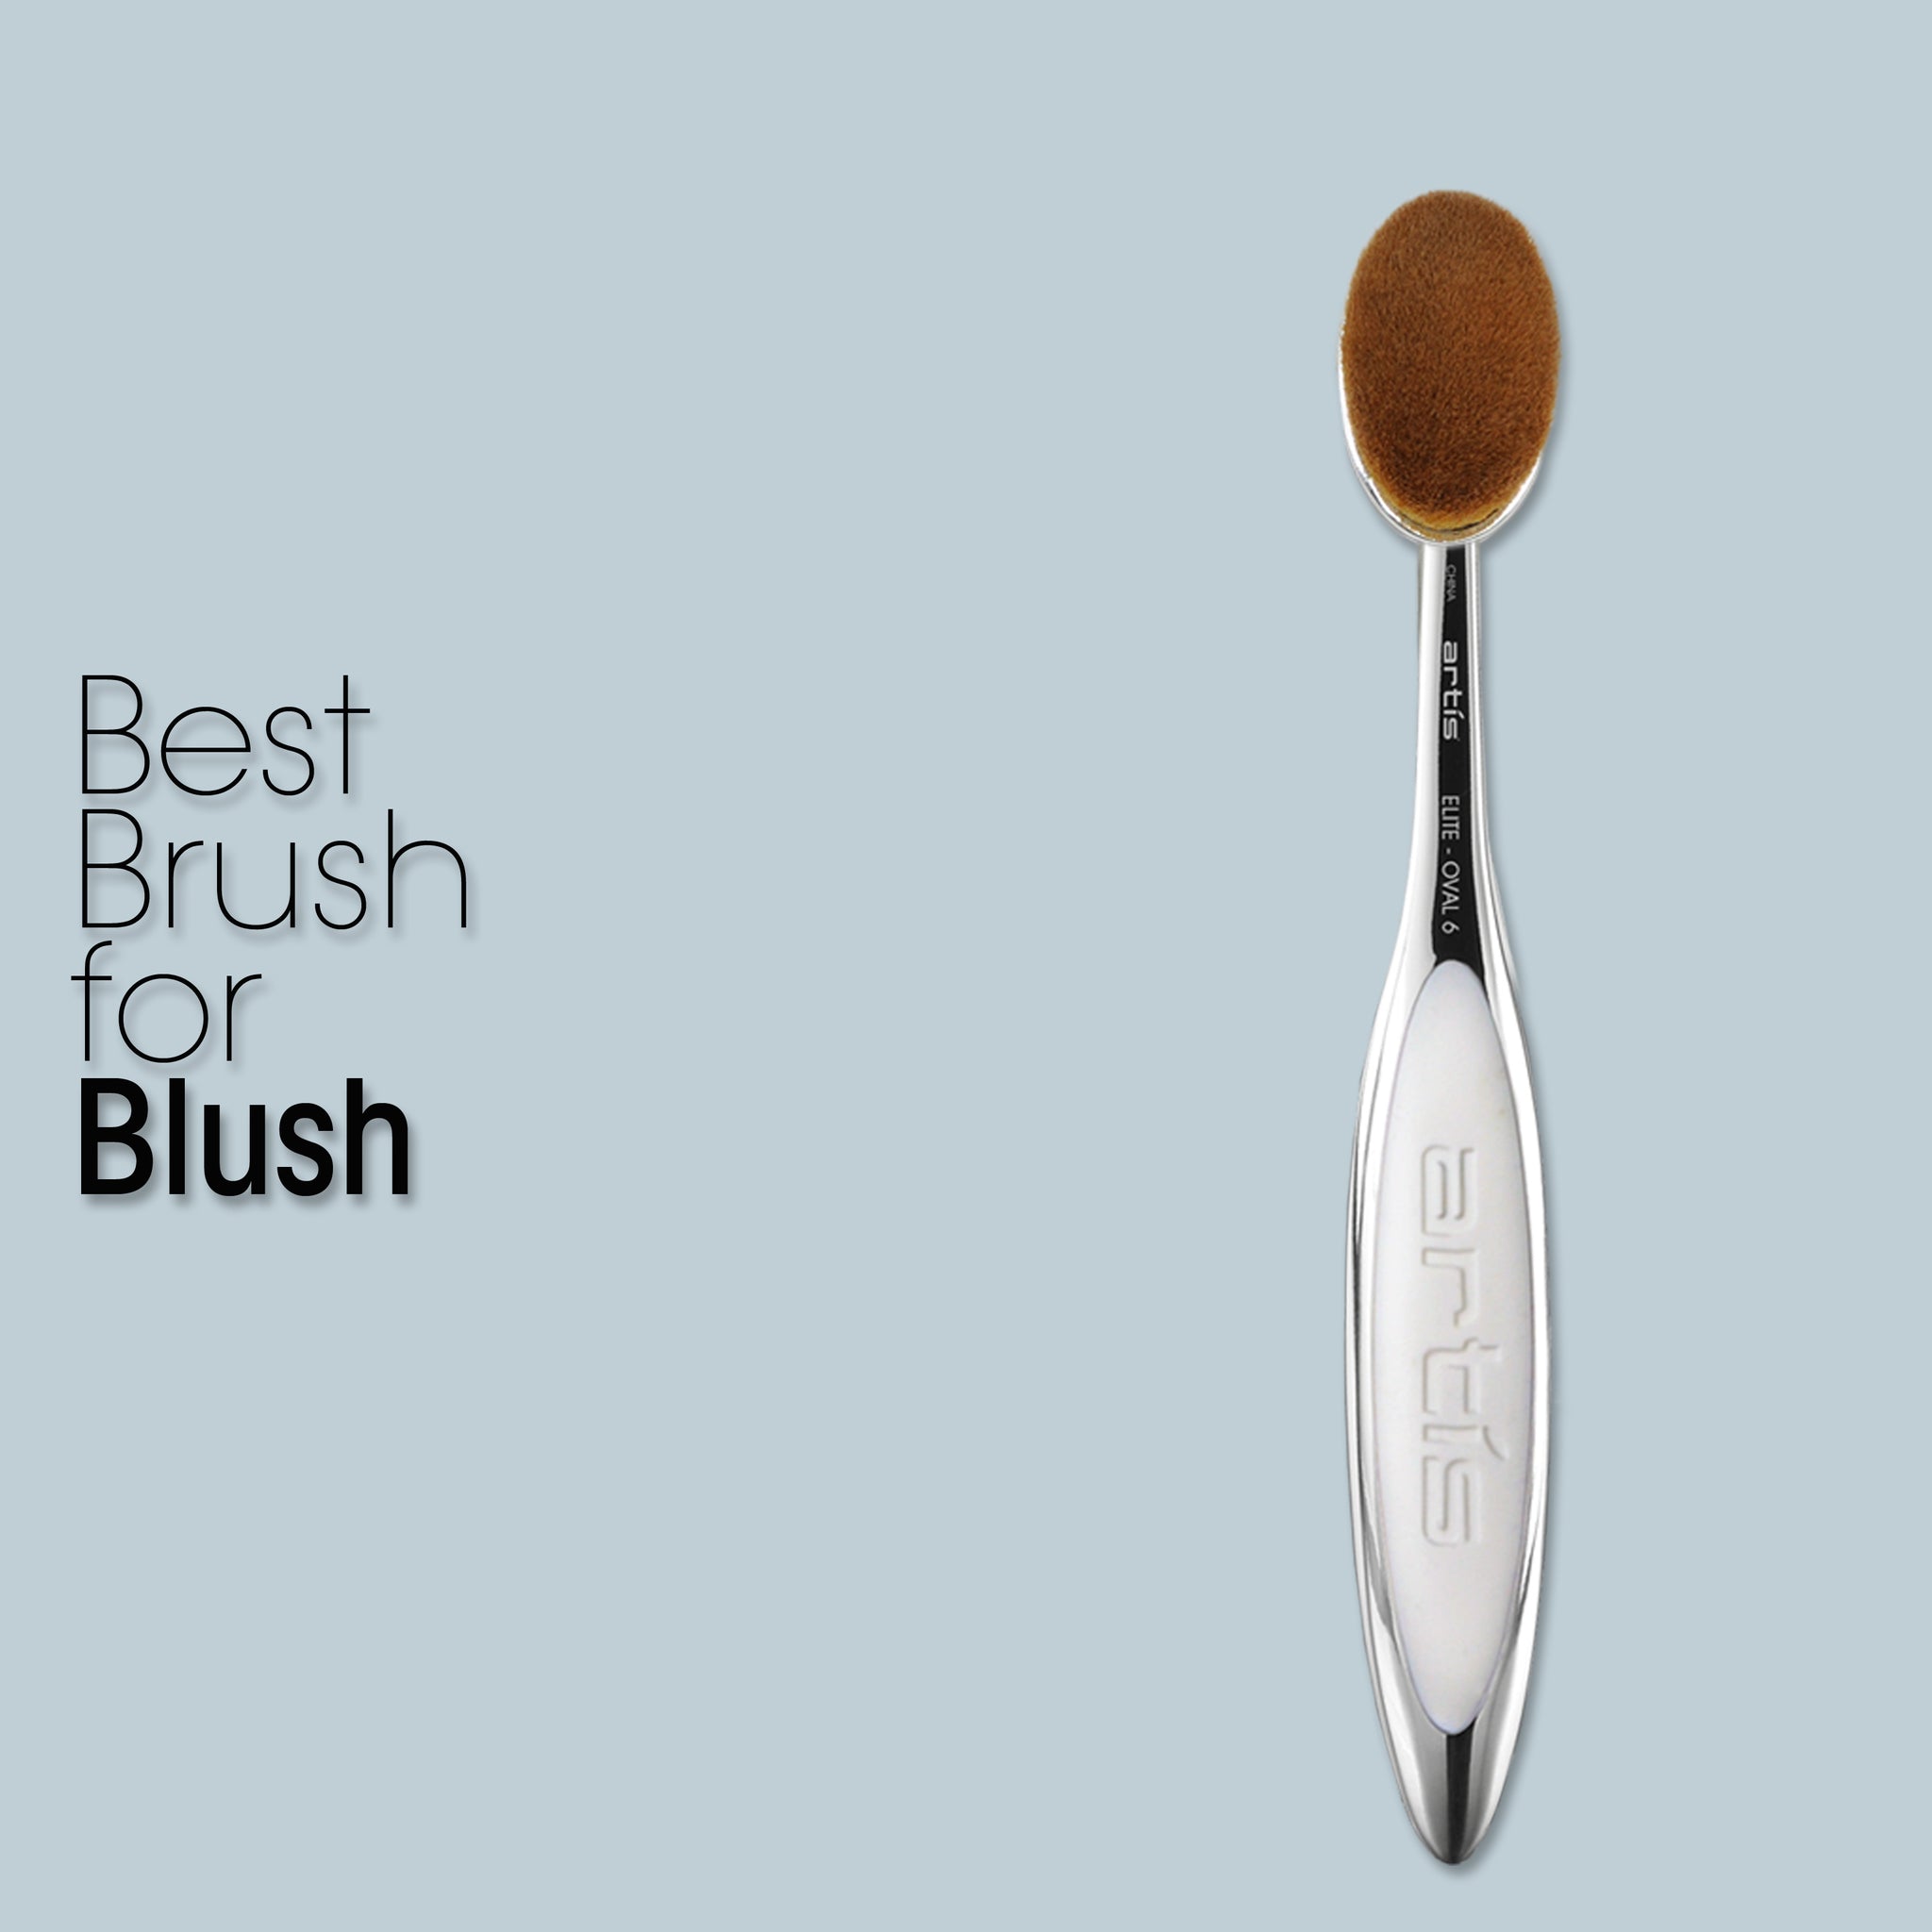 this image is the elite oval 6 brush which is deemed the best brush for blush and contour use.